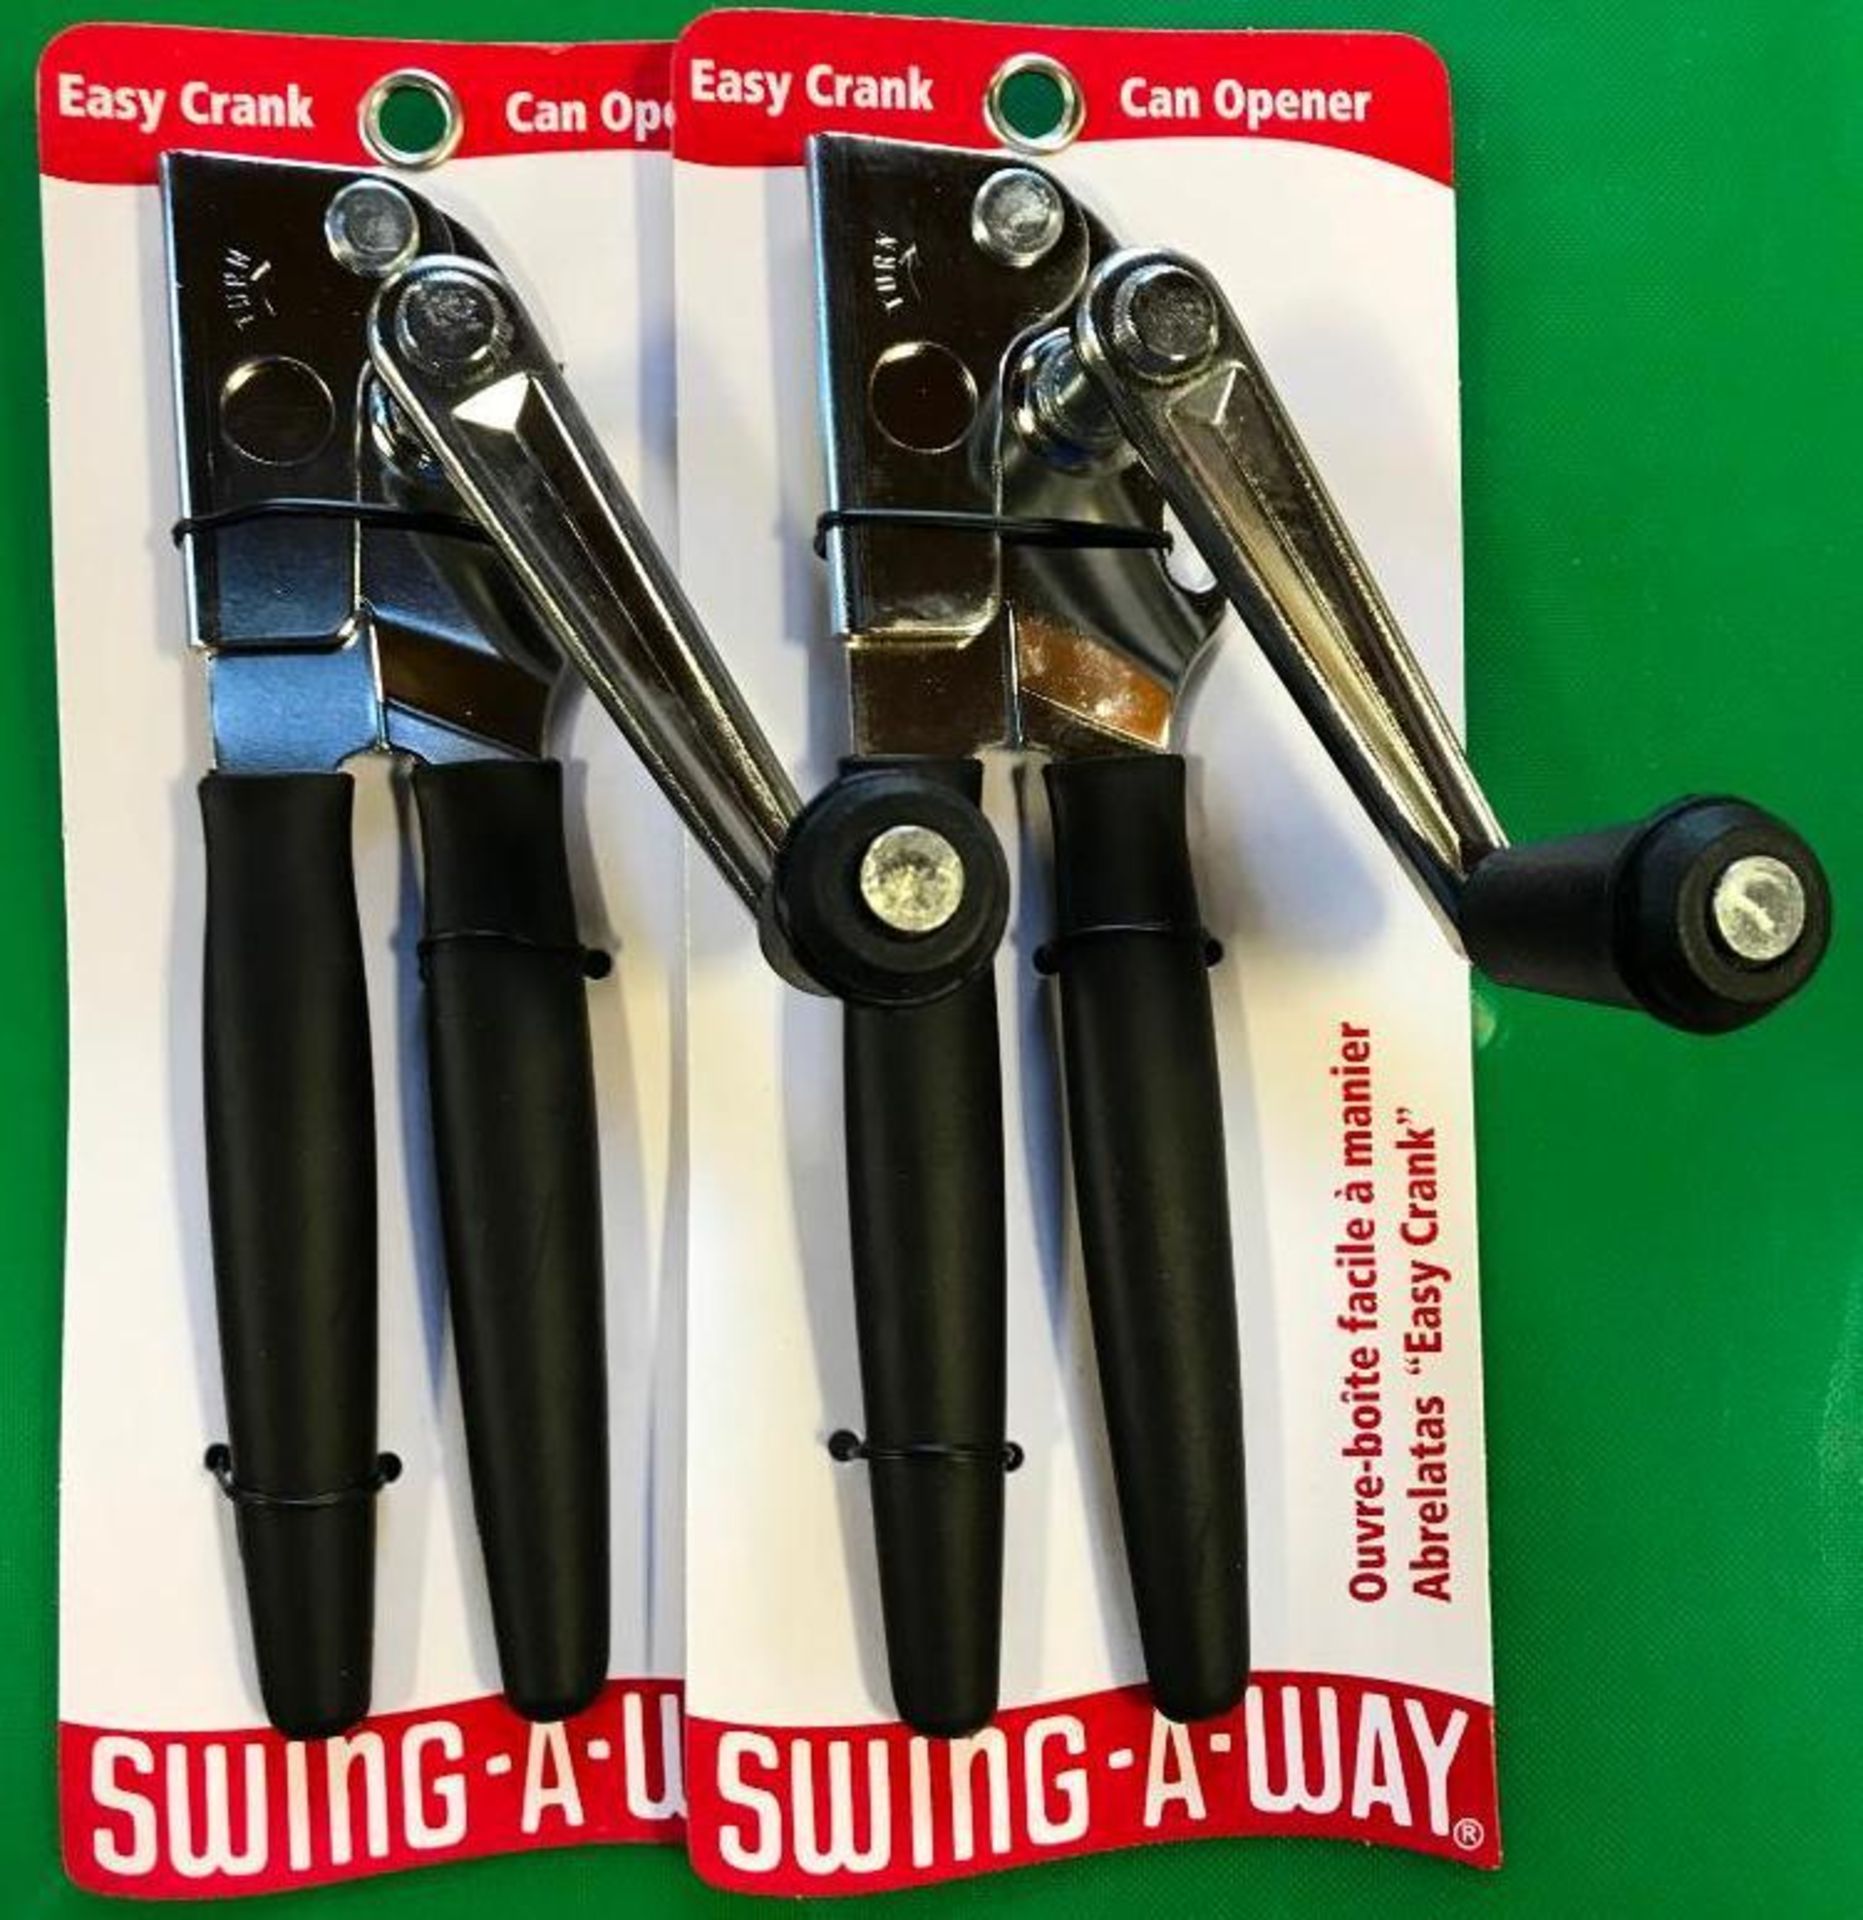 SWING-A-WAY EASY CRANK CAN OPENER, FOCUS 6090 - LOT OF 2 - NEW - Image 2 of 2